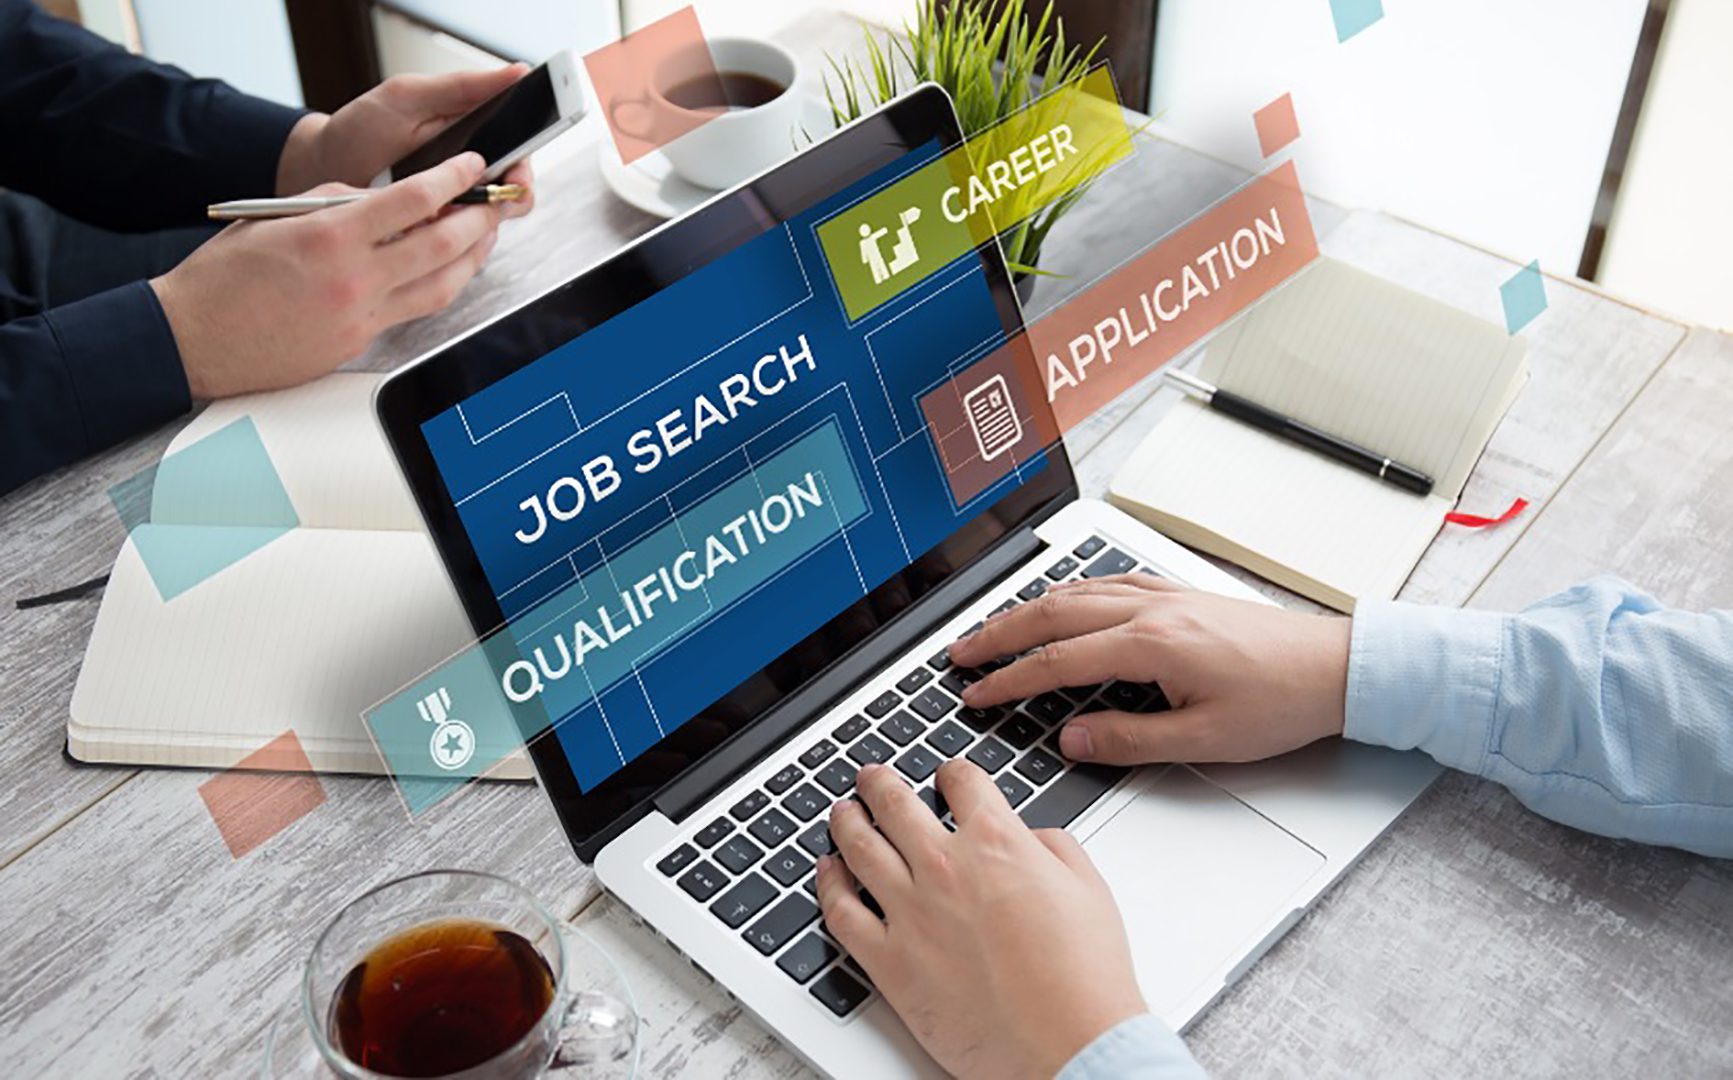 10 essential tips for a successful job search